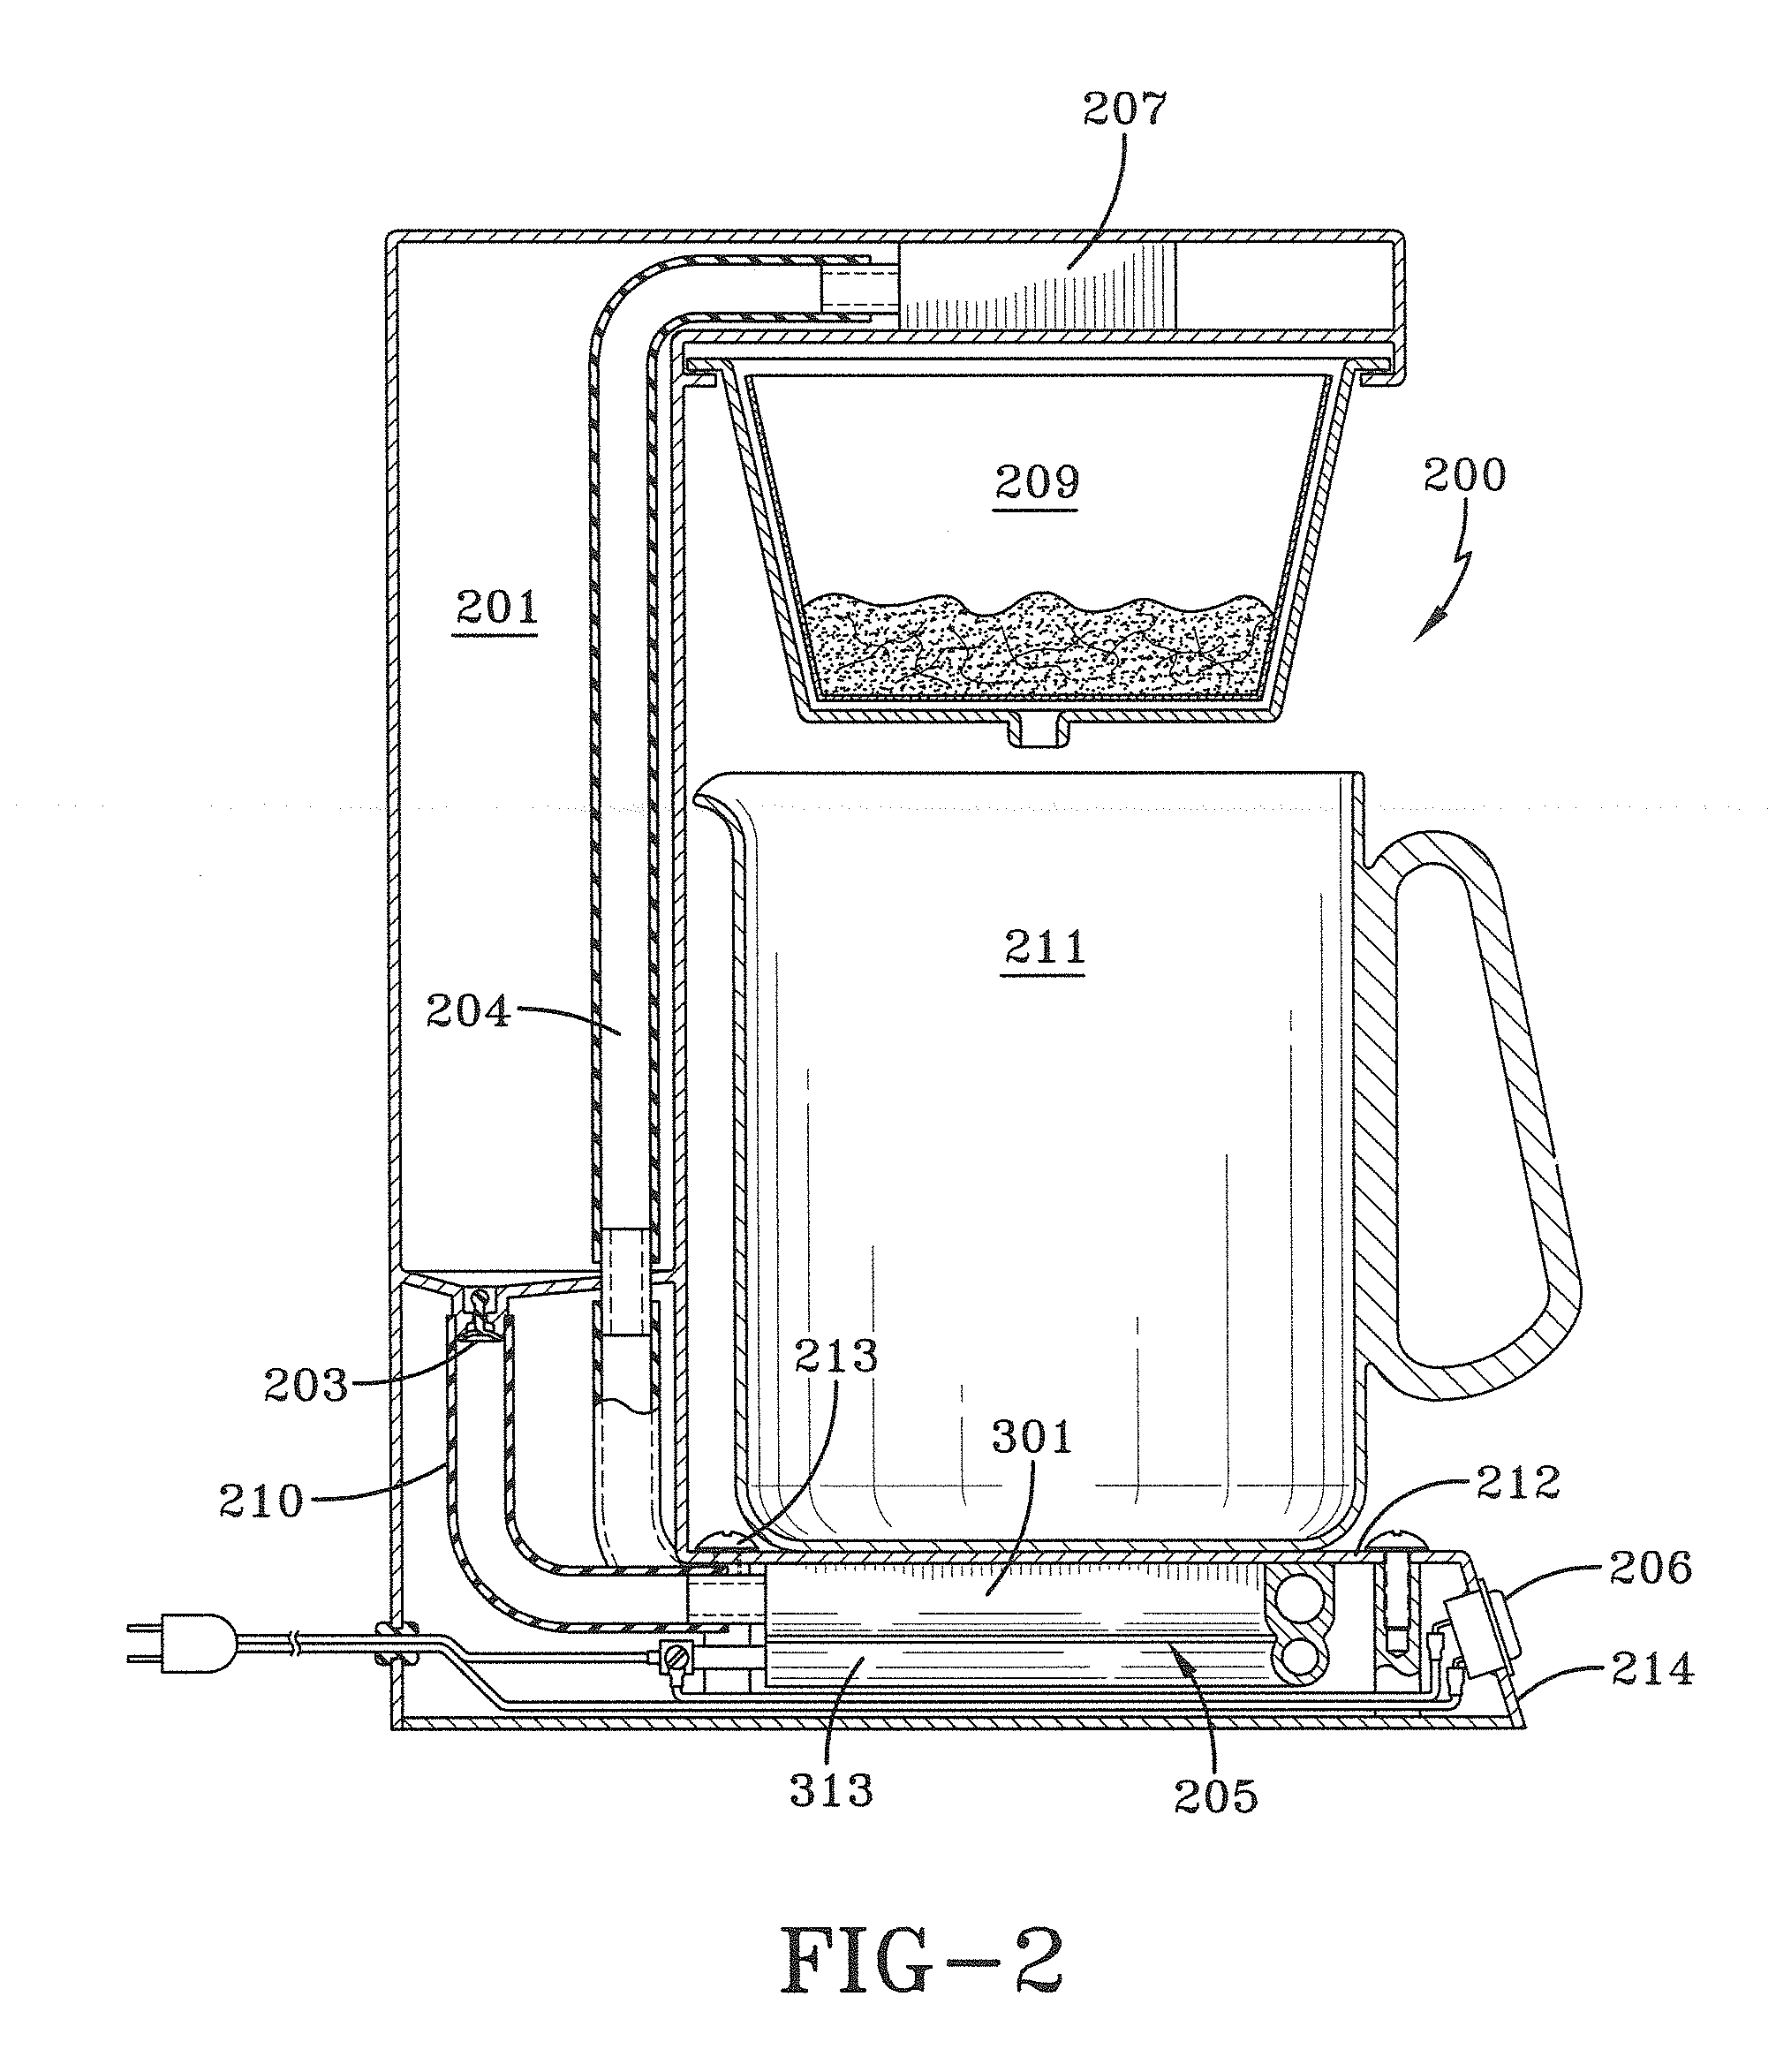 Device for Controlling a Coffee Maker